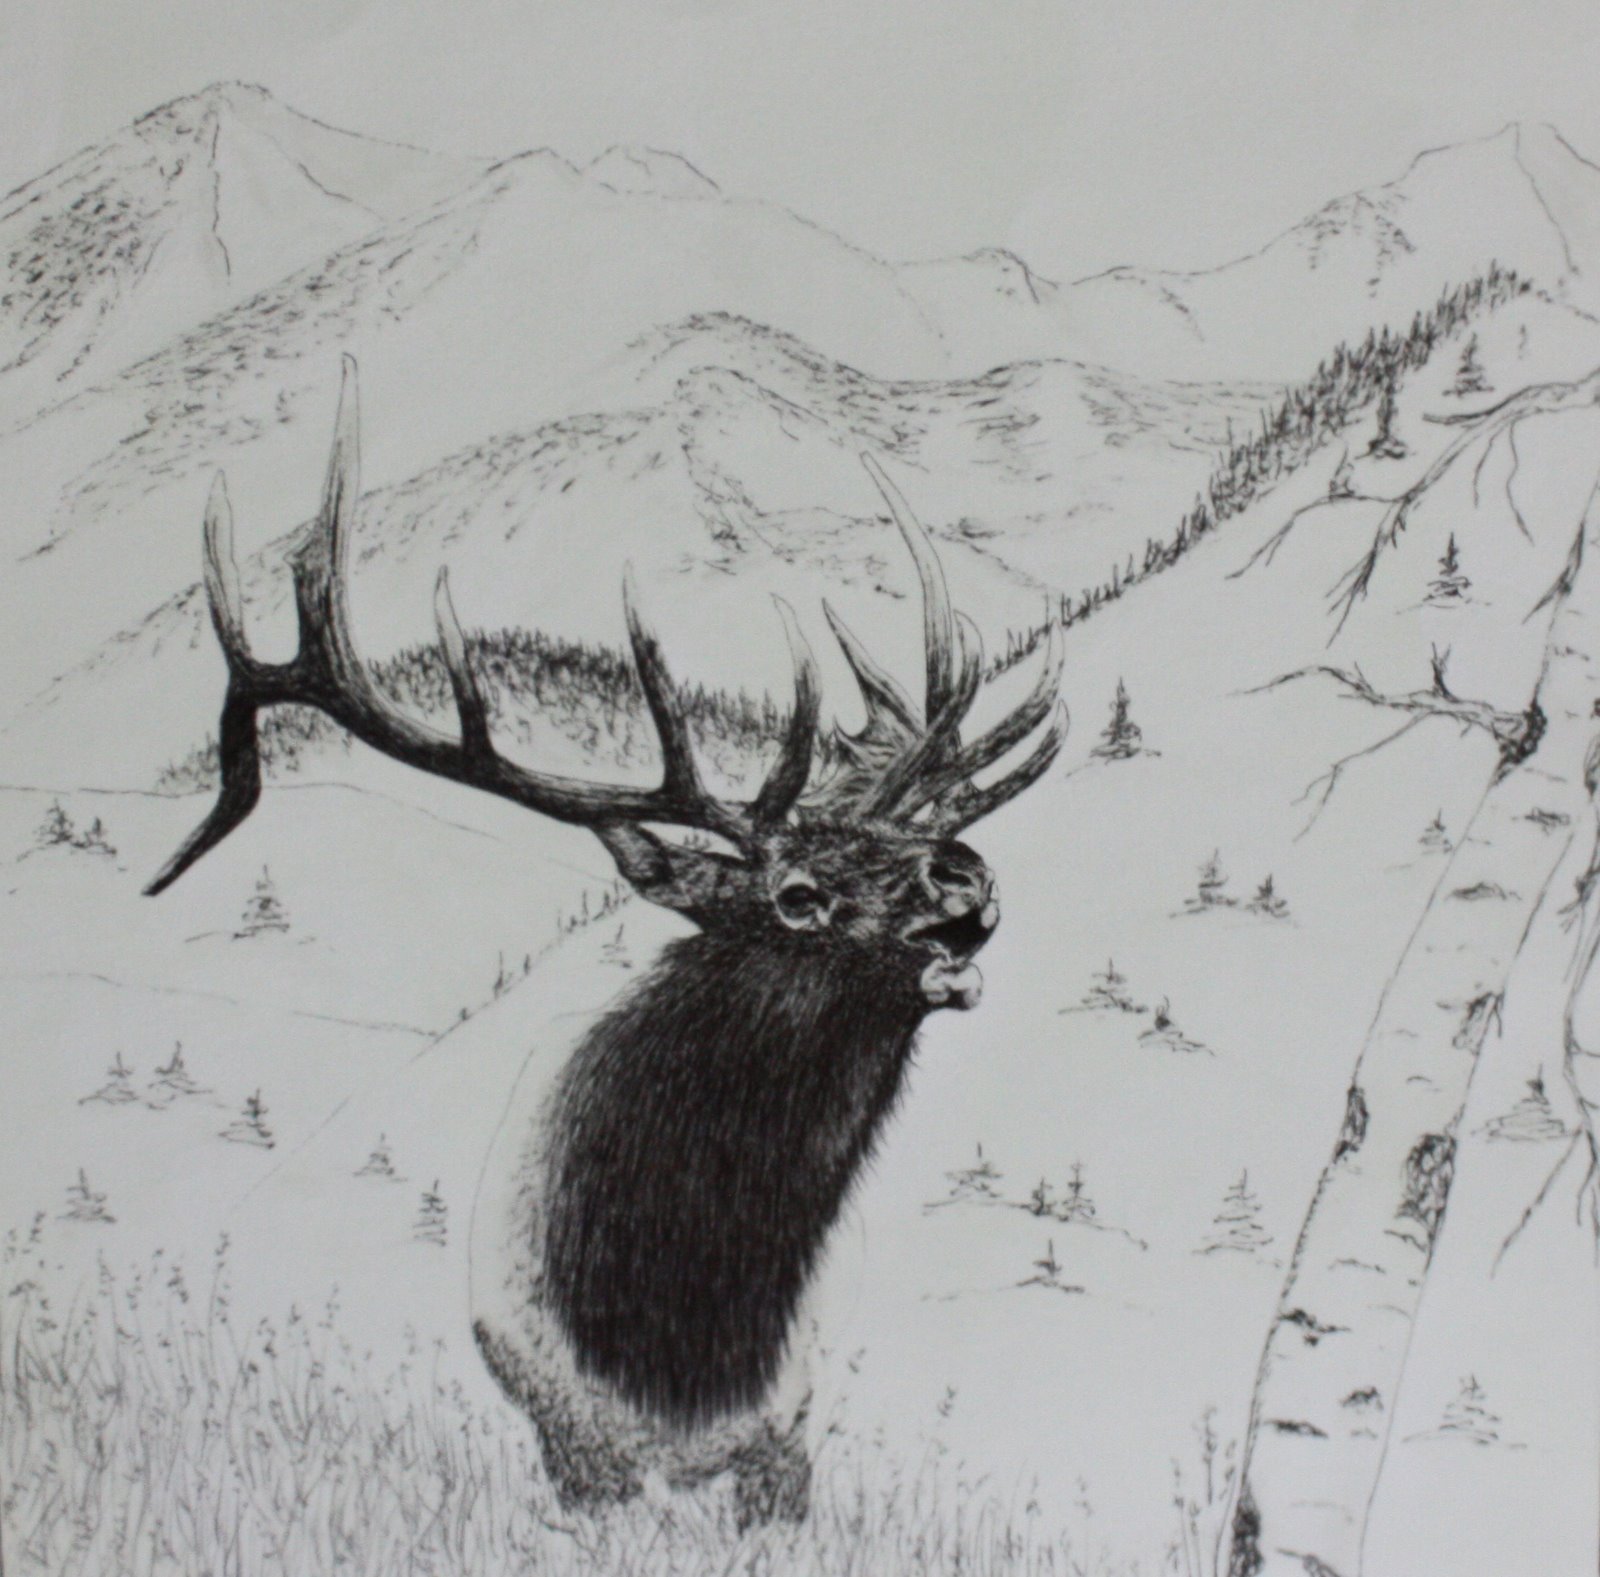 [Elk+hovers+above+mountain+background.jpg]